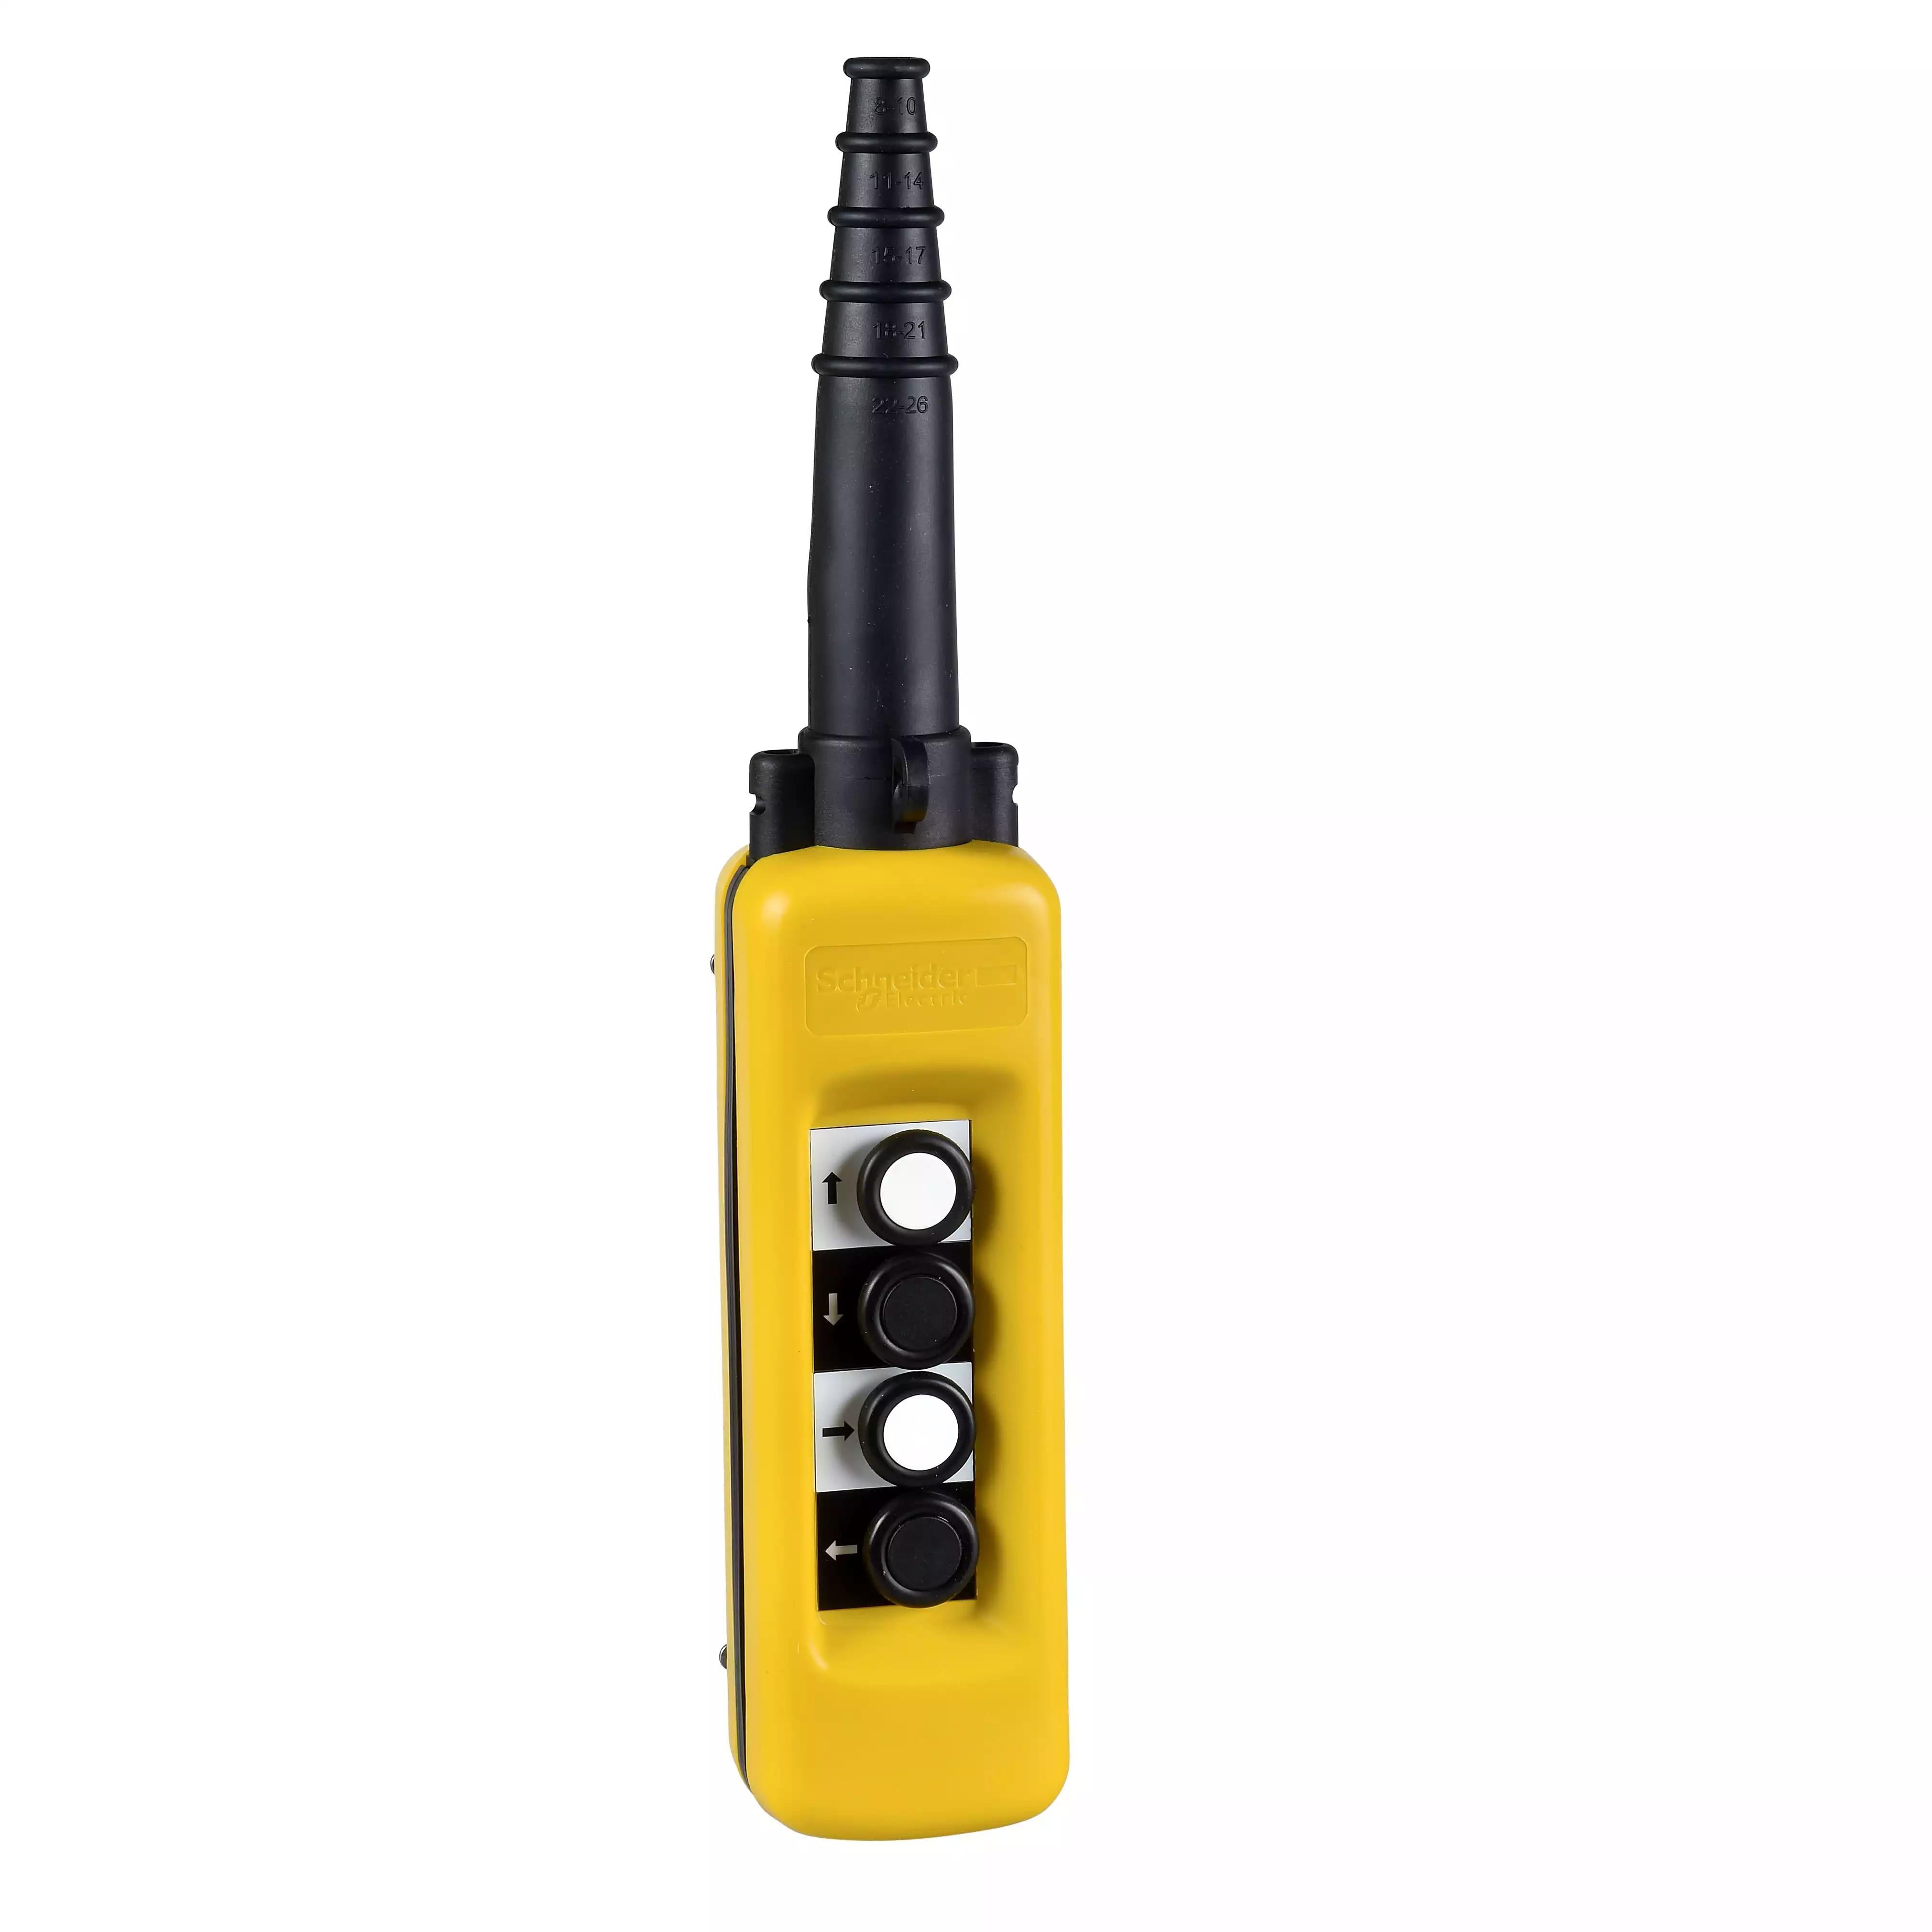 Pendant control station, Harmony XAC, plastic, yellow, 4 push buttons with NO+NC